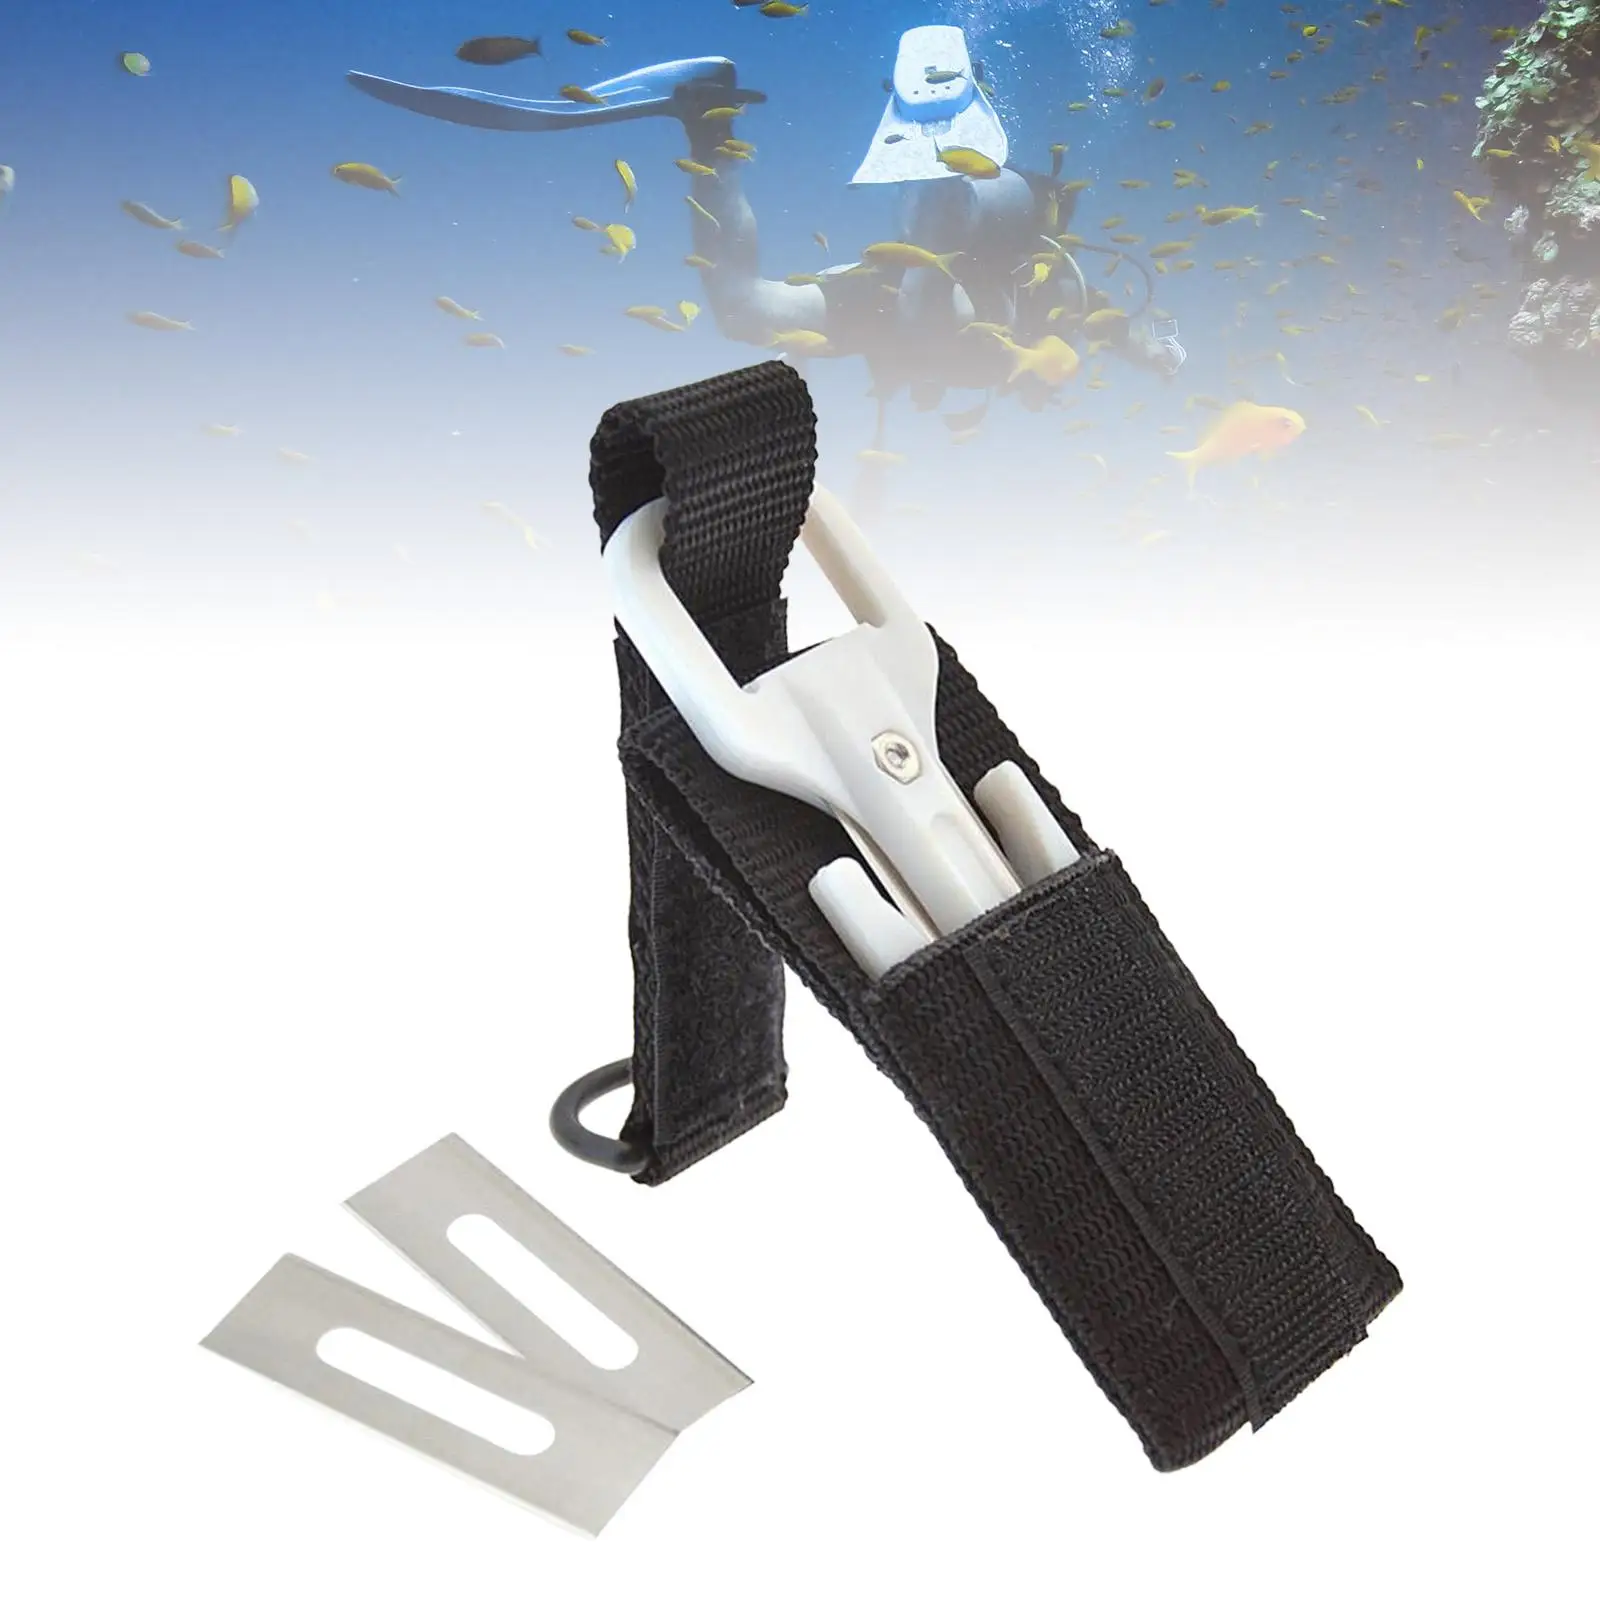 Nylon Scuba Dive Line Cutter with Extra Blades Snorkeling Knives for Diving